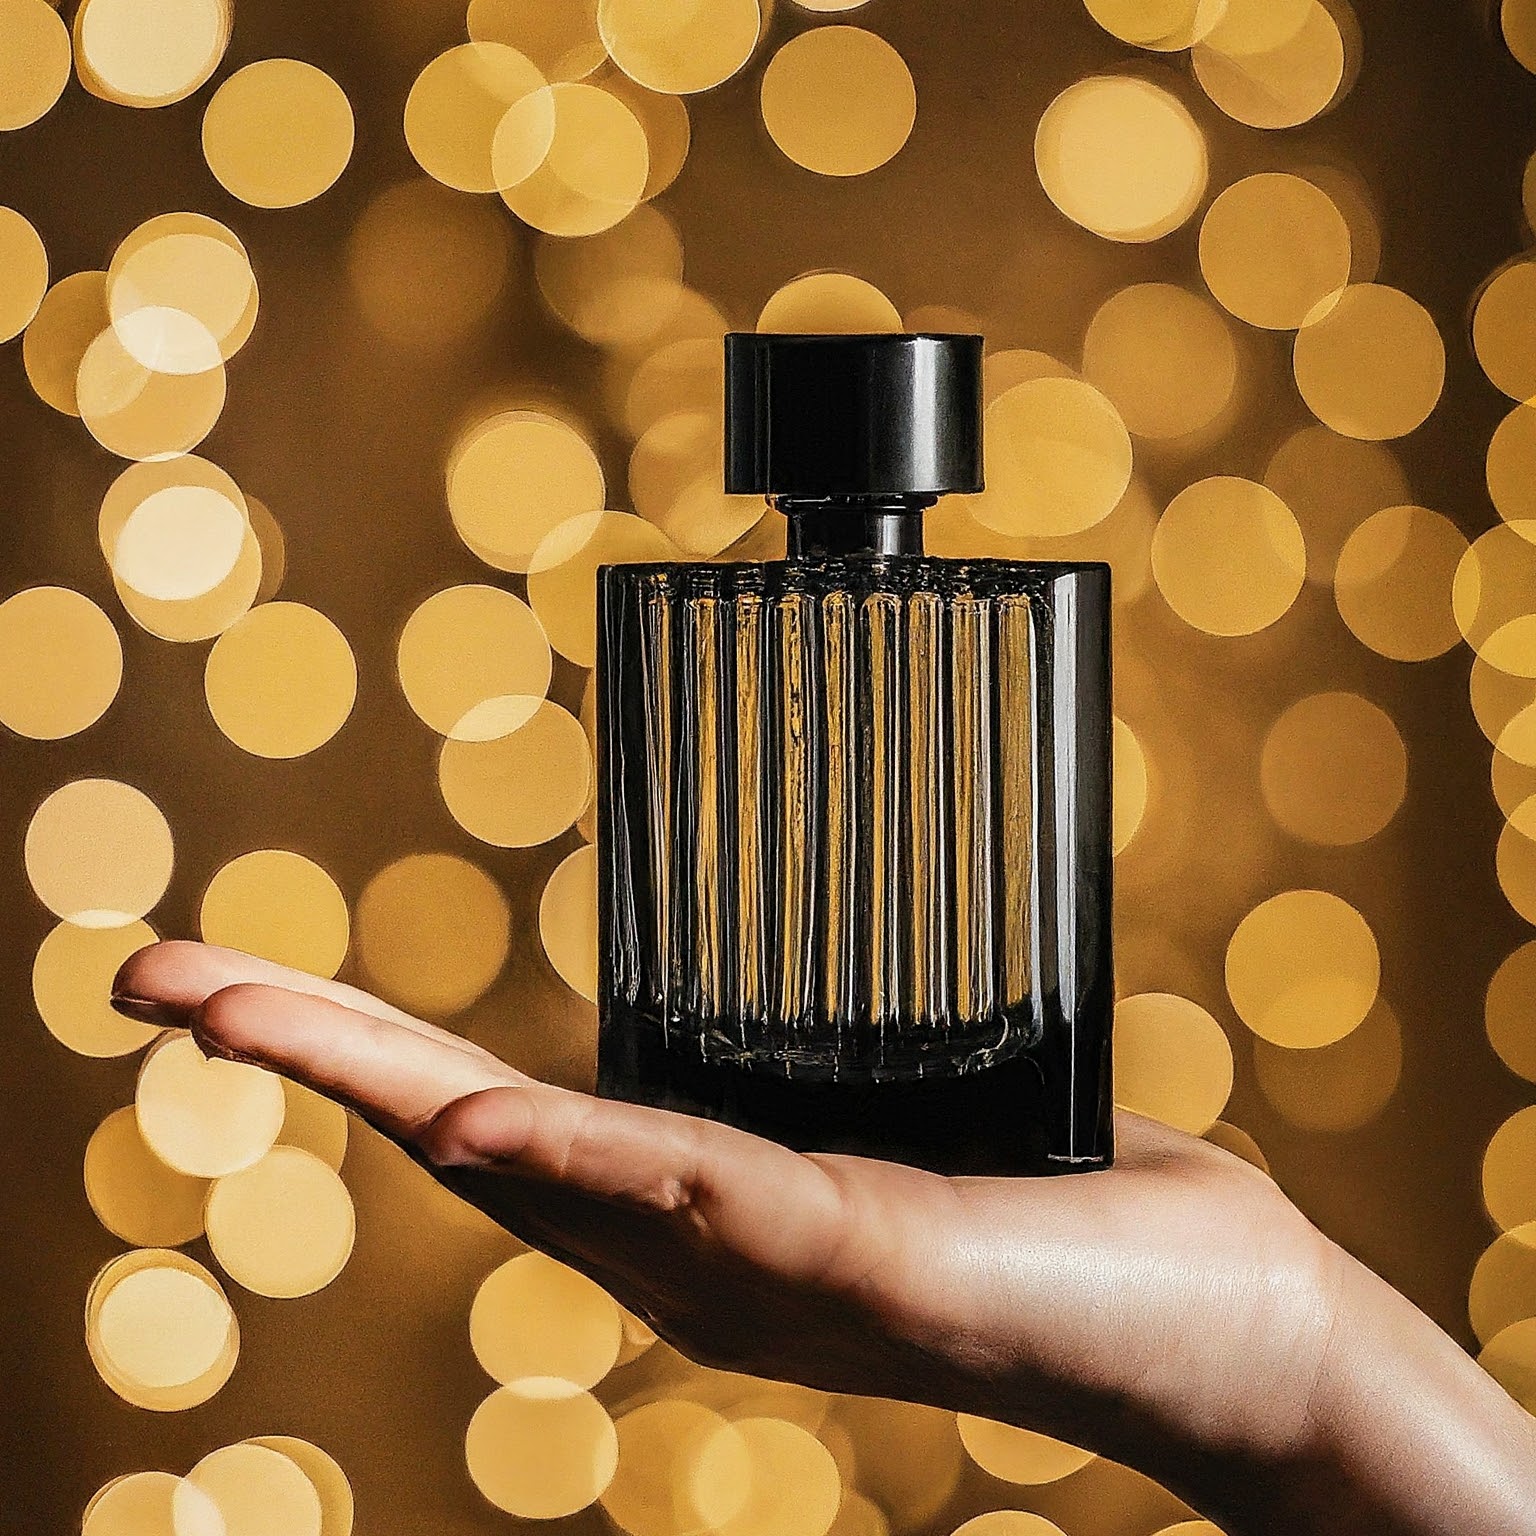 Perfumes for men and women